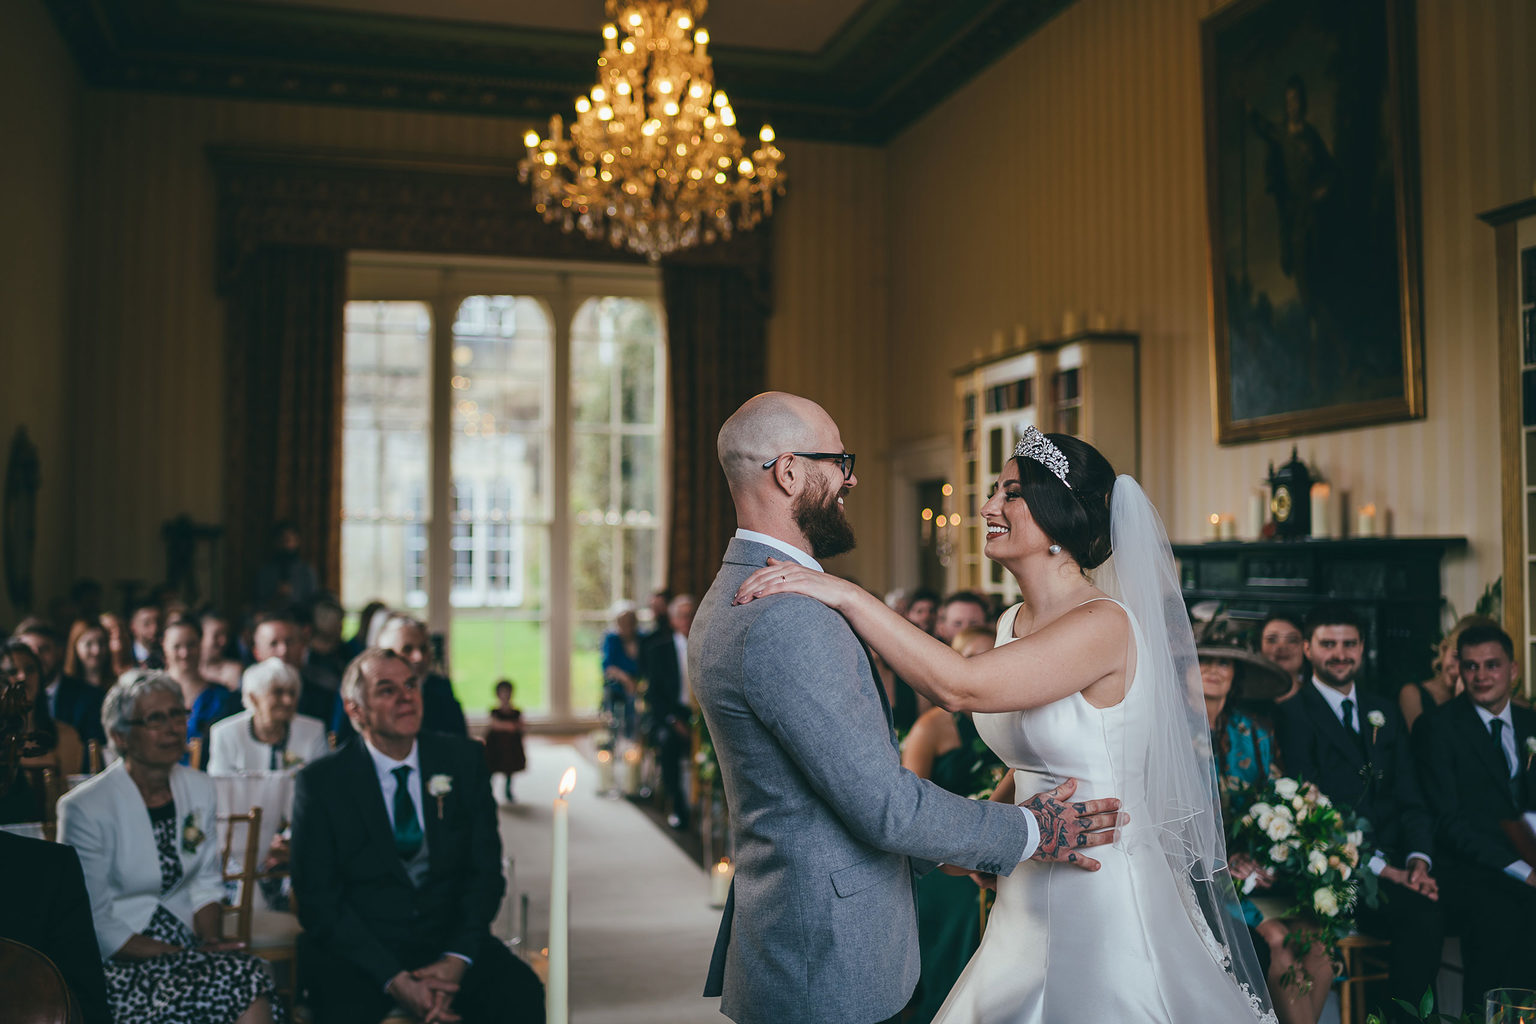 A bride and groom getting married during a castle hotel wedding ceremony at Swinton Park Hotel near Harrogate in North Yorkshire. Photo by Joel Skingle.